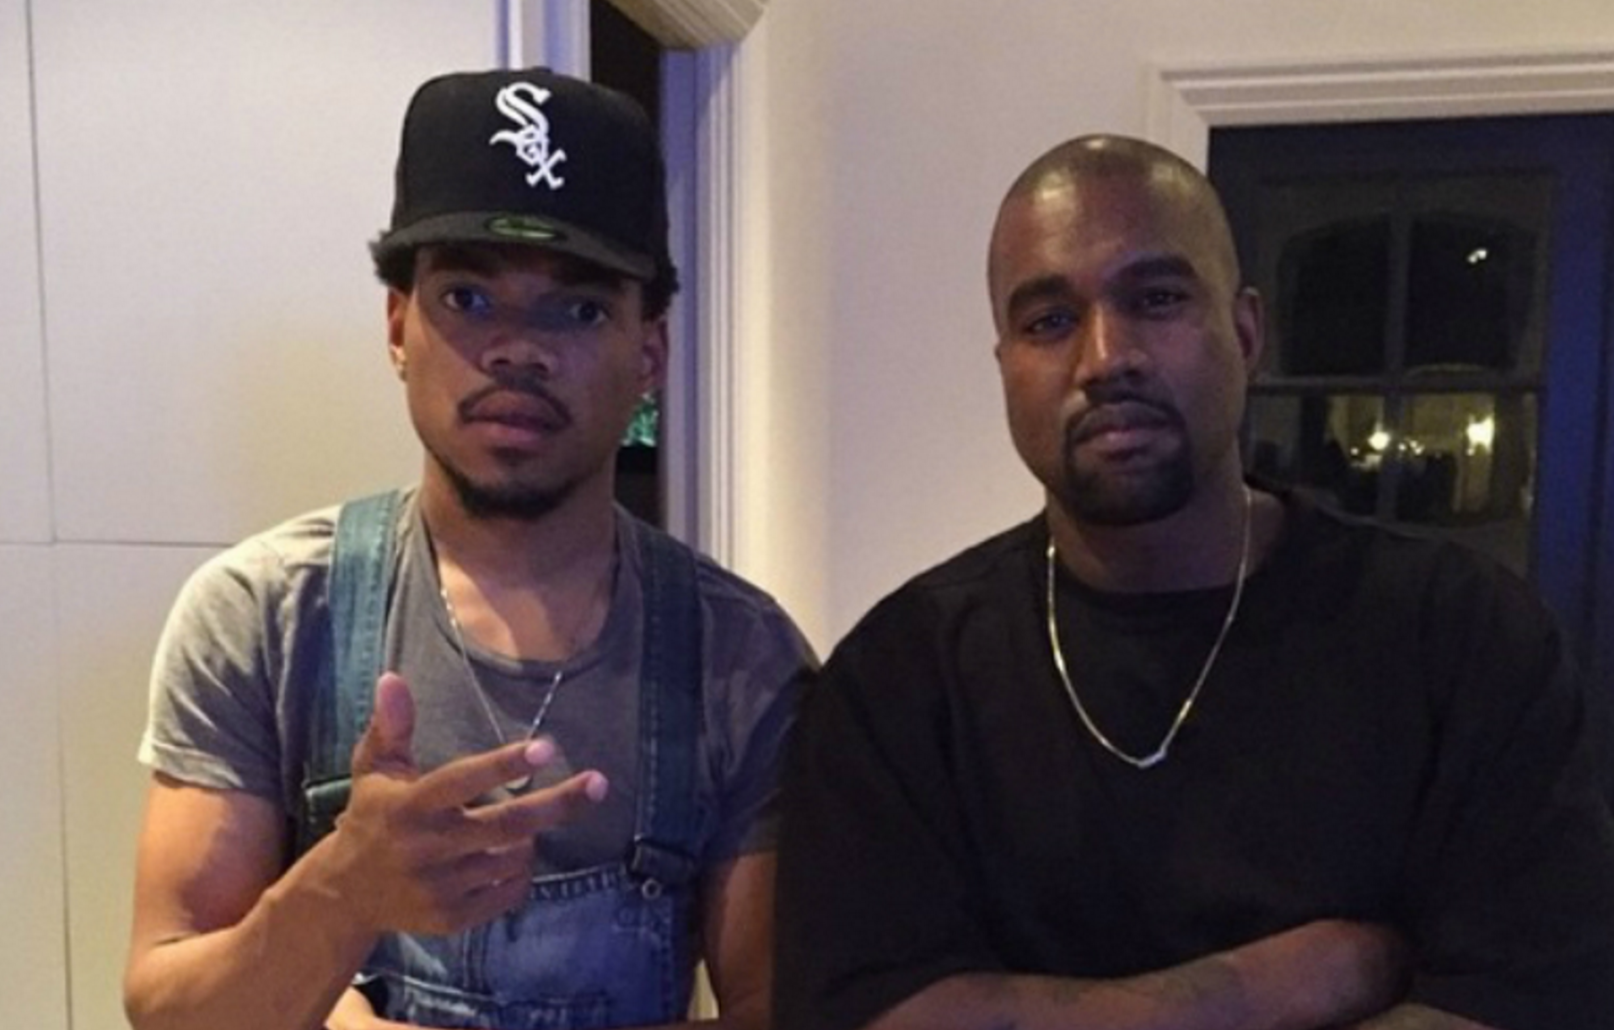 Chance The Rapper and Kanye West